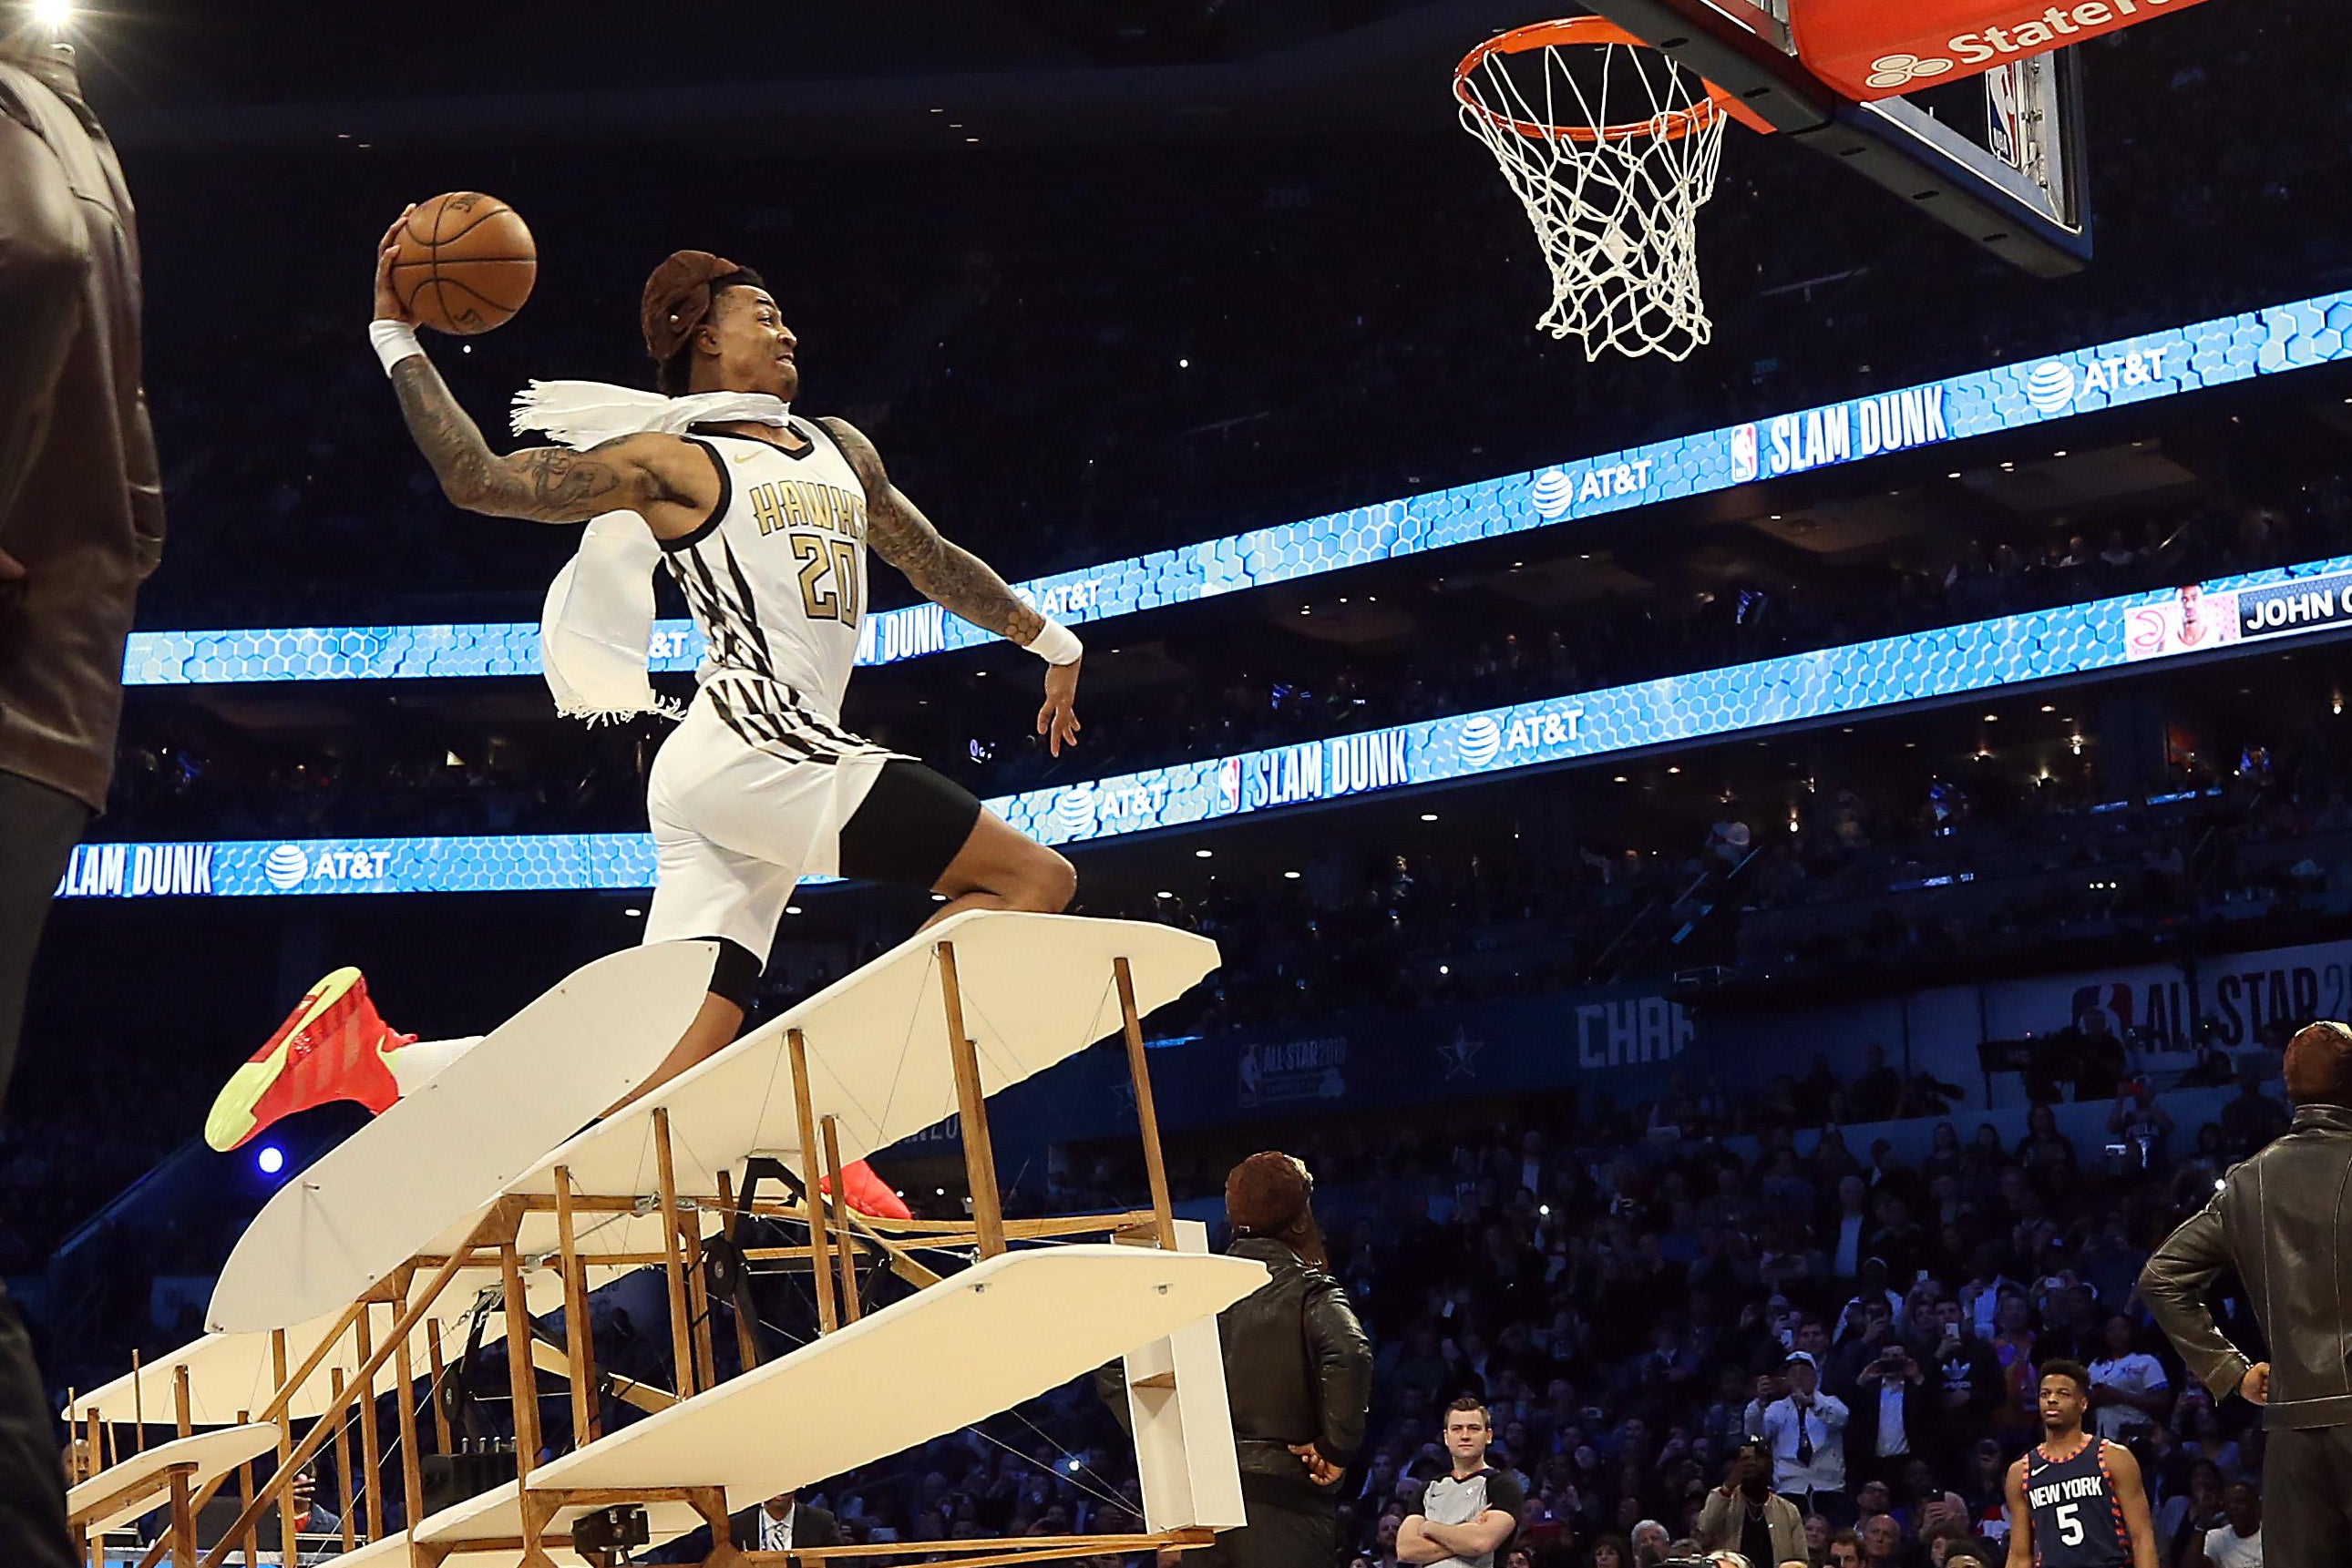 CHARLOTTE, NORTH CAROLINA - FEBRUARY 16: John Collins #20 of the Atlanta Hawks goes up for a dunk during the AT&T Slam Dunk as part of the 2019 NBA All-Star Weekend at Spectrum Center on February 16, 2019 in Charlotte, North Carolina. (Photo by Streeter Lecka/Getty Images)